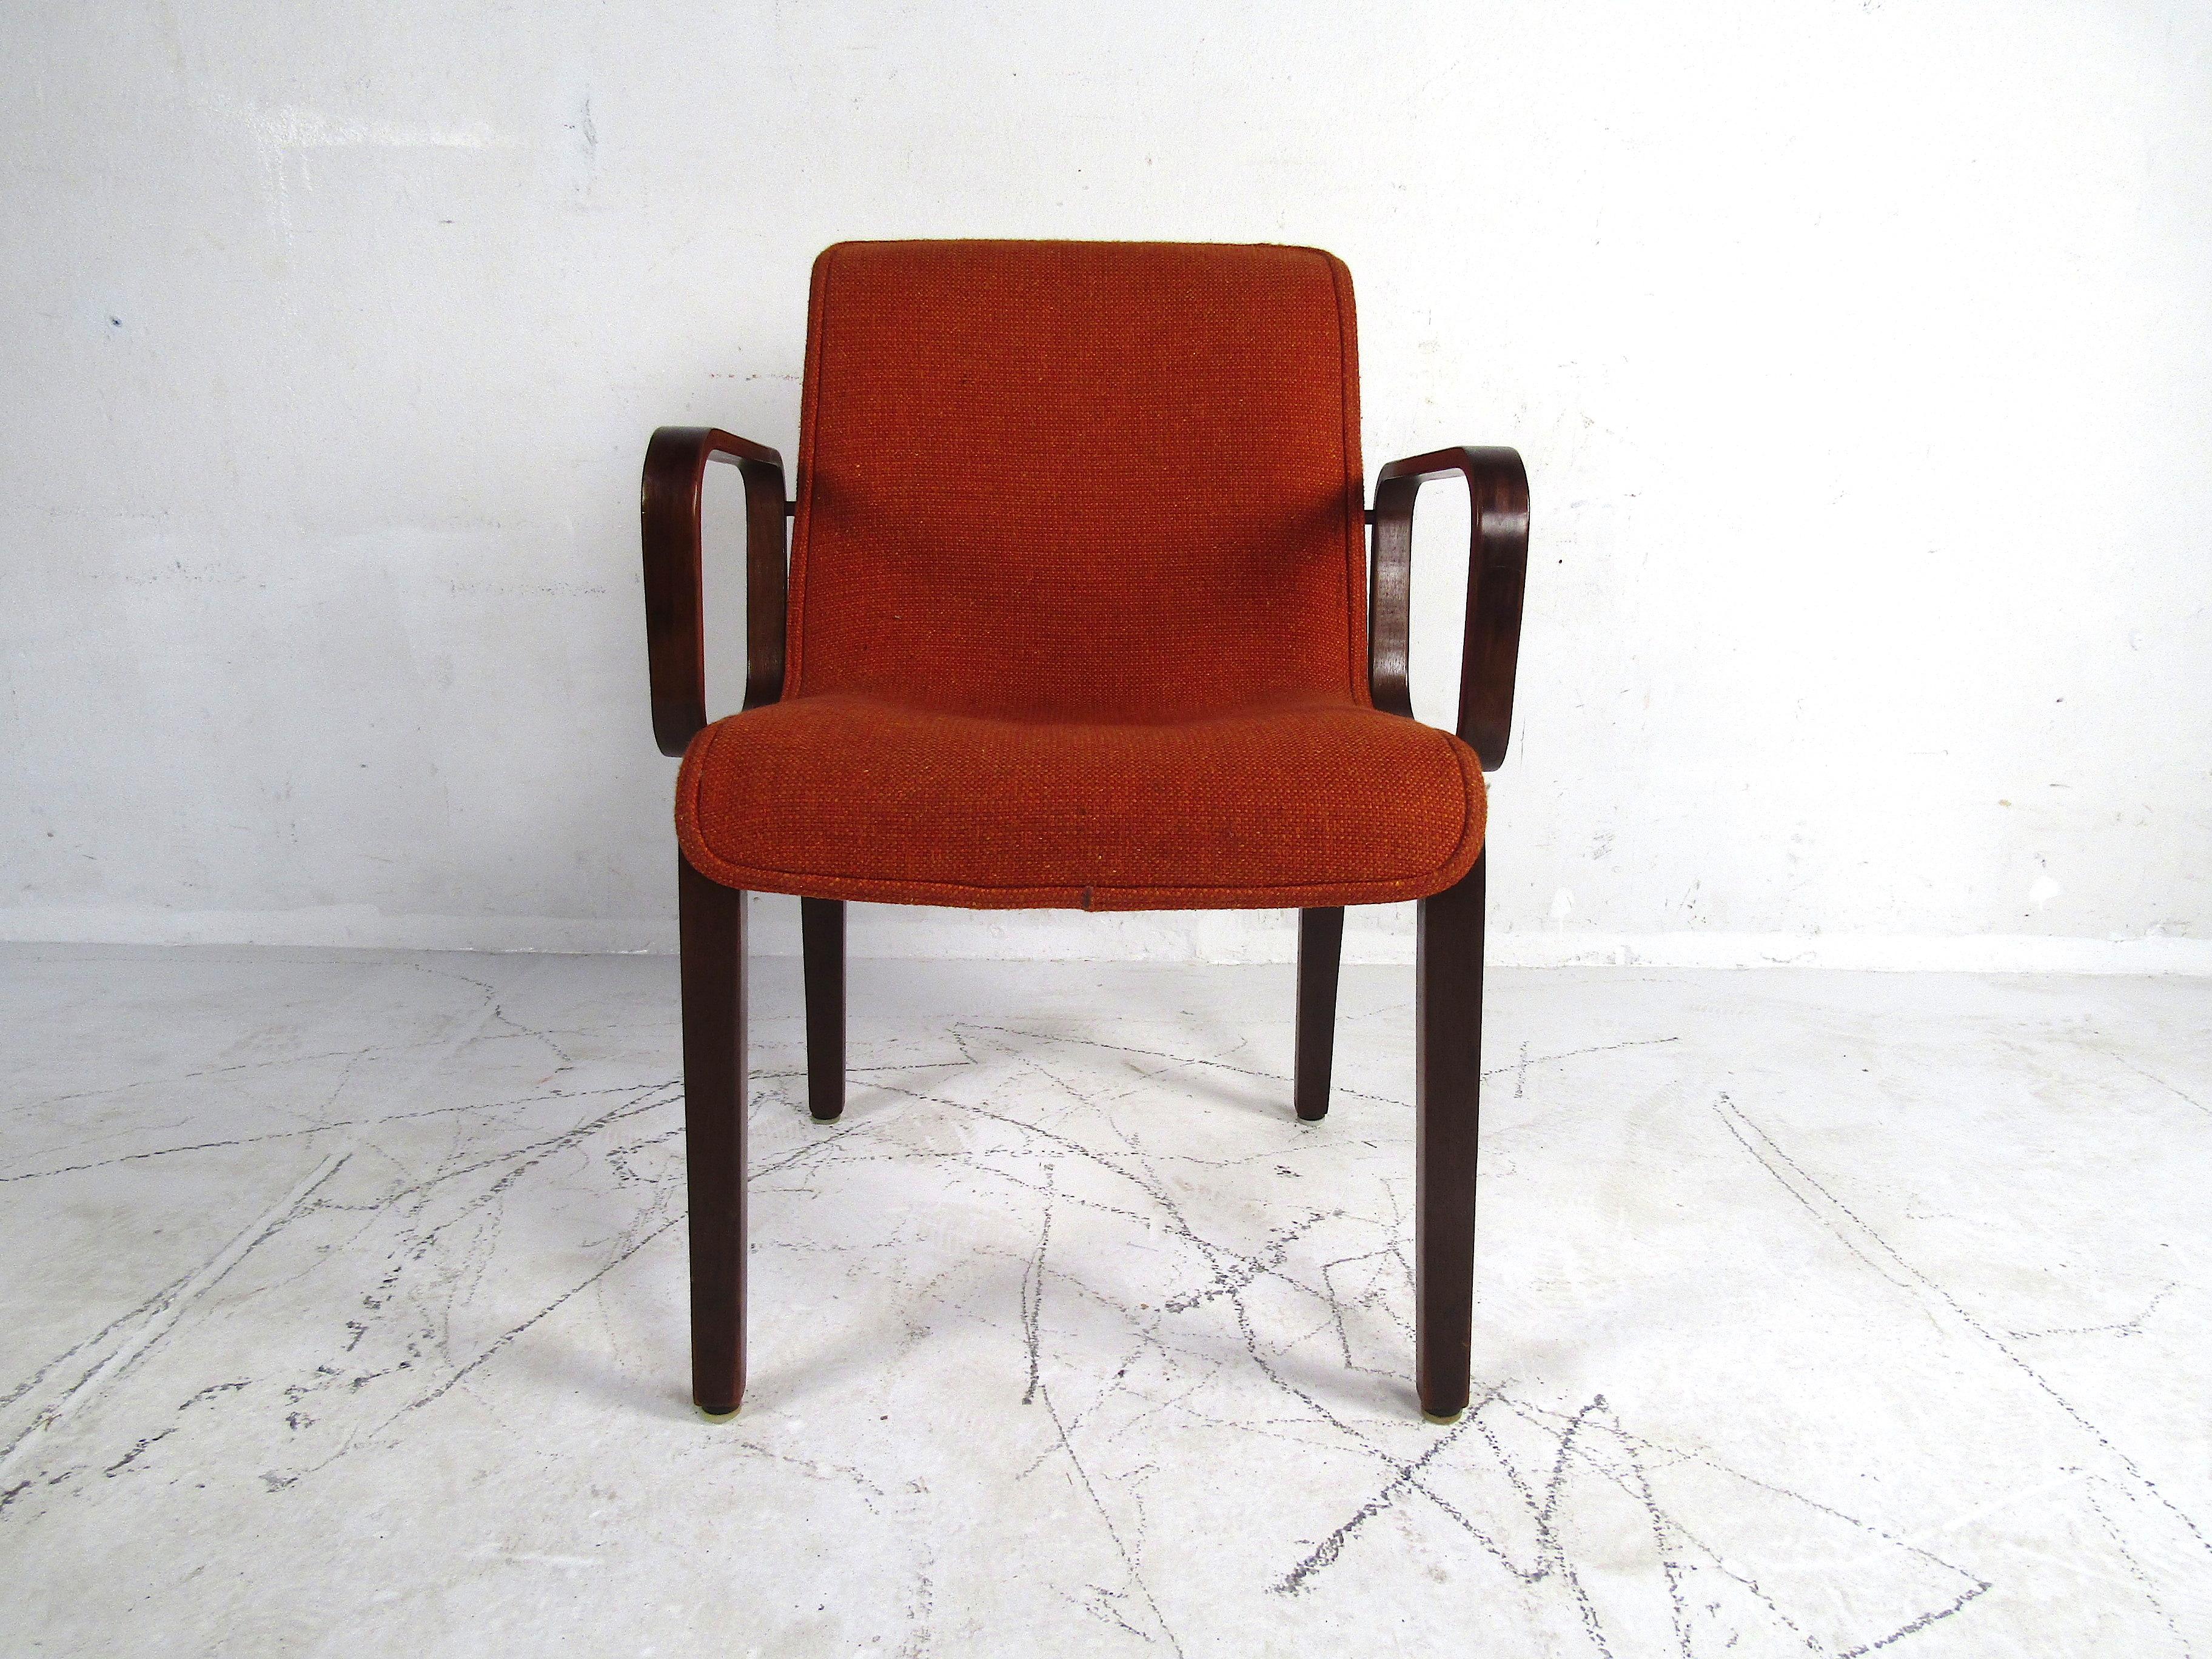 A stylish set of 4 midcentury upholstered dining chairs. Bentwood frames with interestingly contoured armrests on each chair. Seats and backs are covered in a vintage orange upholstery. This set is sure to provide a great seating solution to any